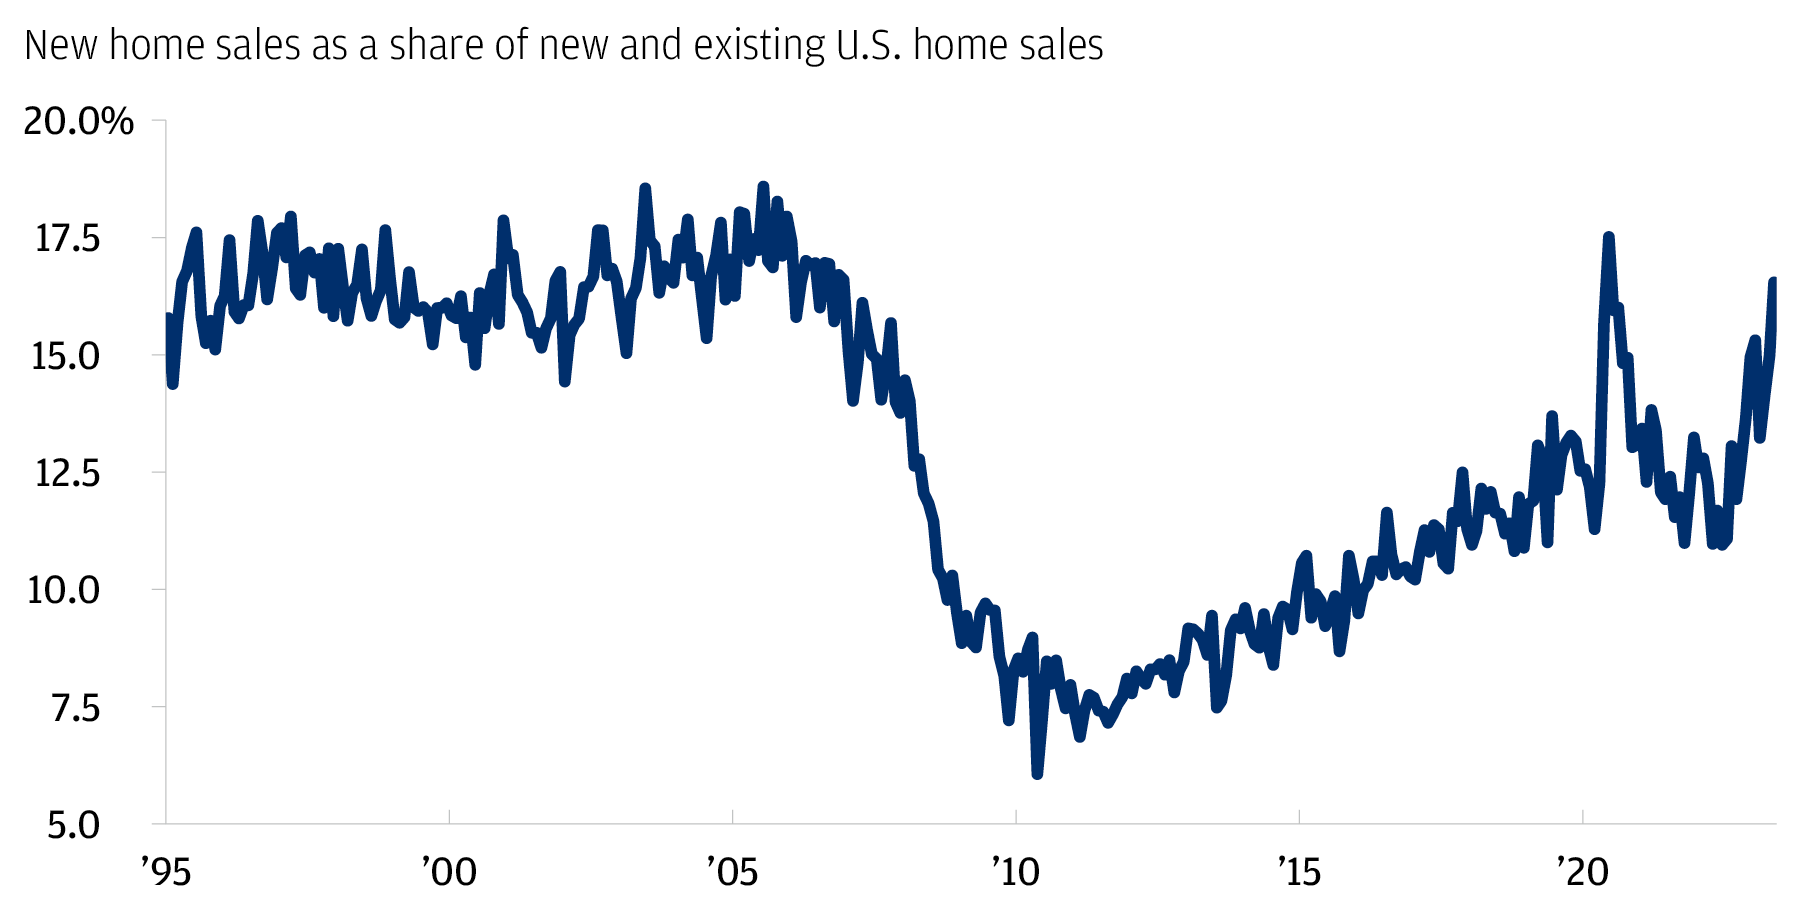 The chart describes new home sales as share of new + existing home sales from 1995 to 2023. 